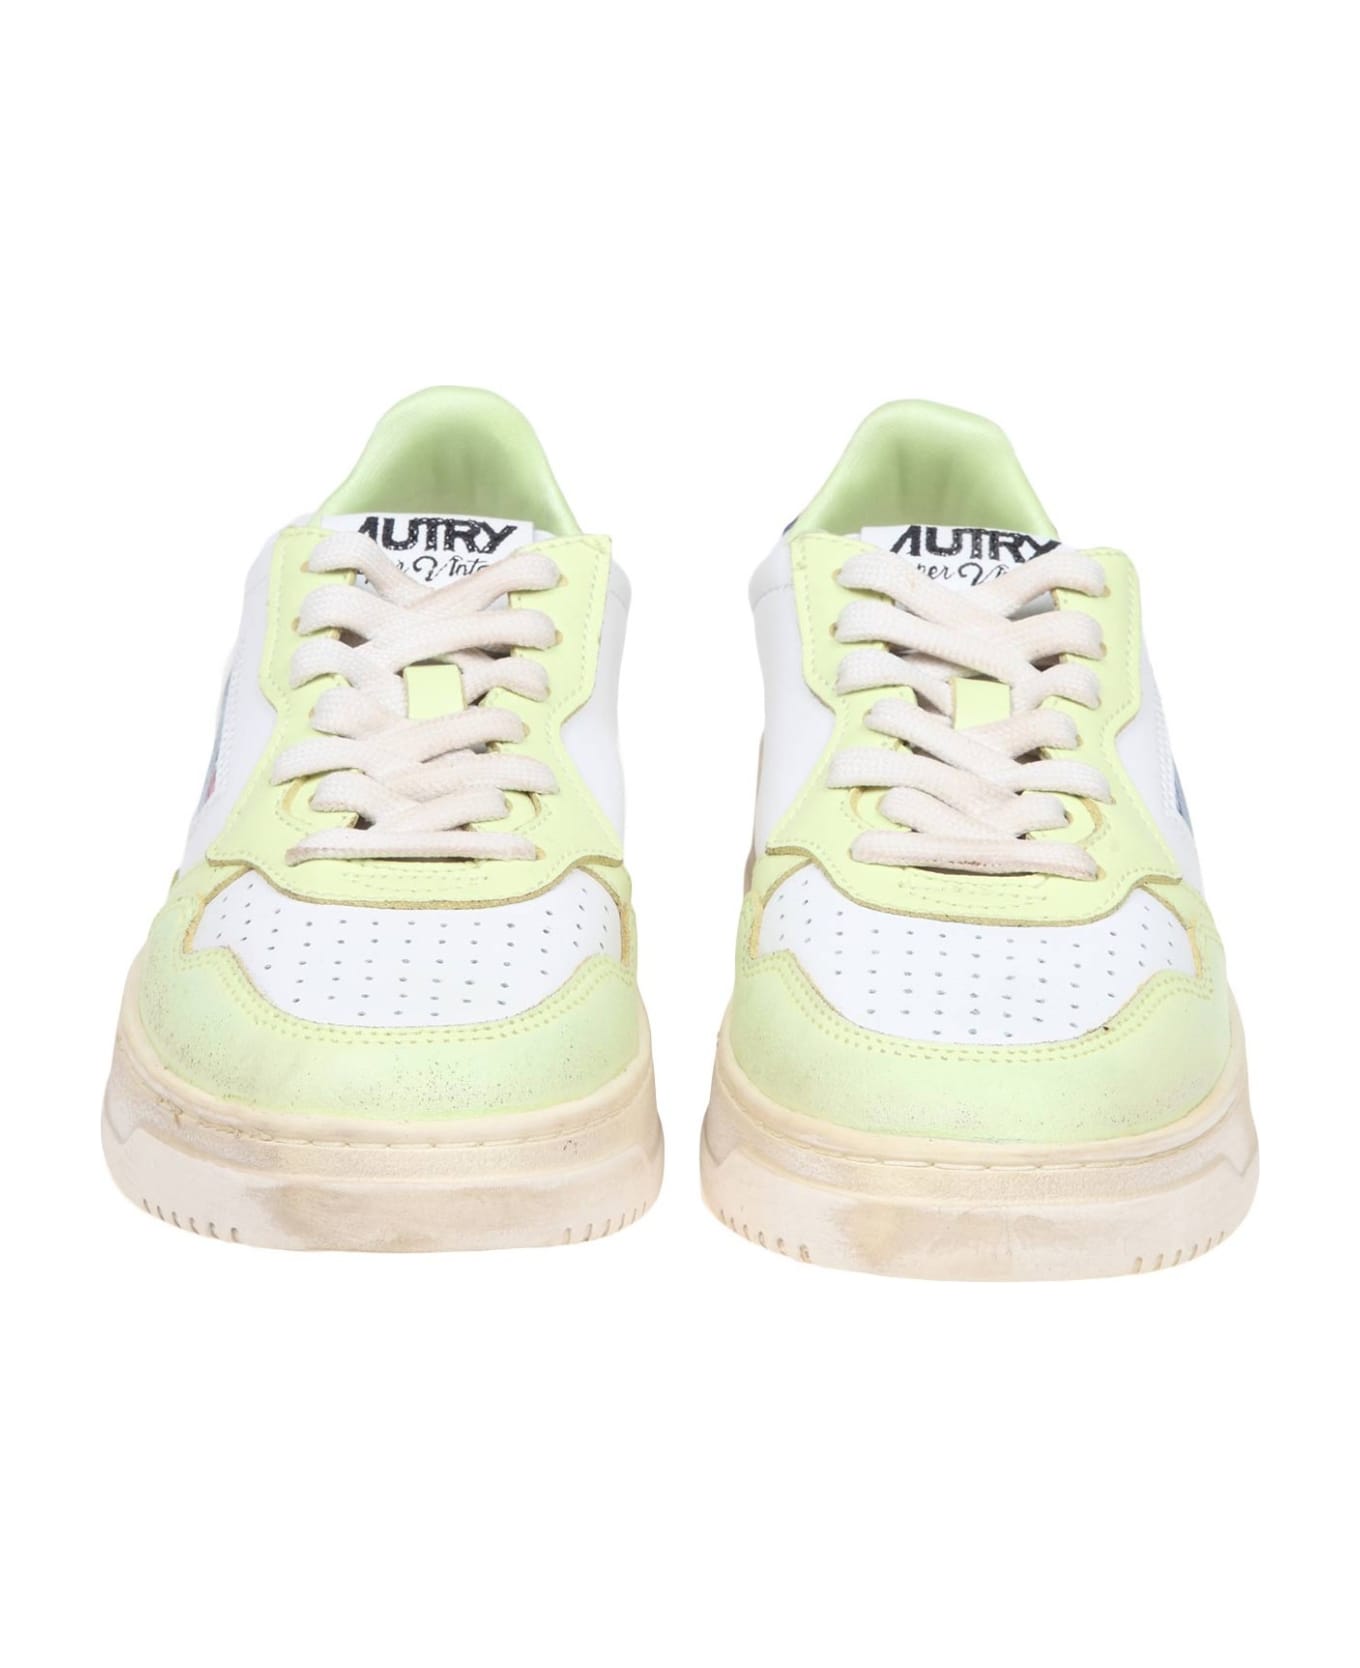 Autry Sneakers In Vintage Leather - Multicolor